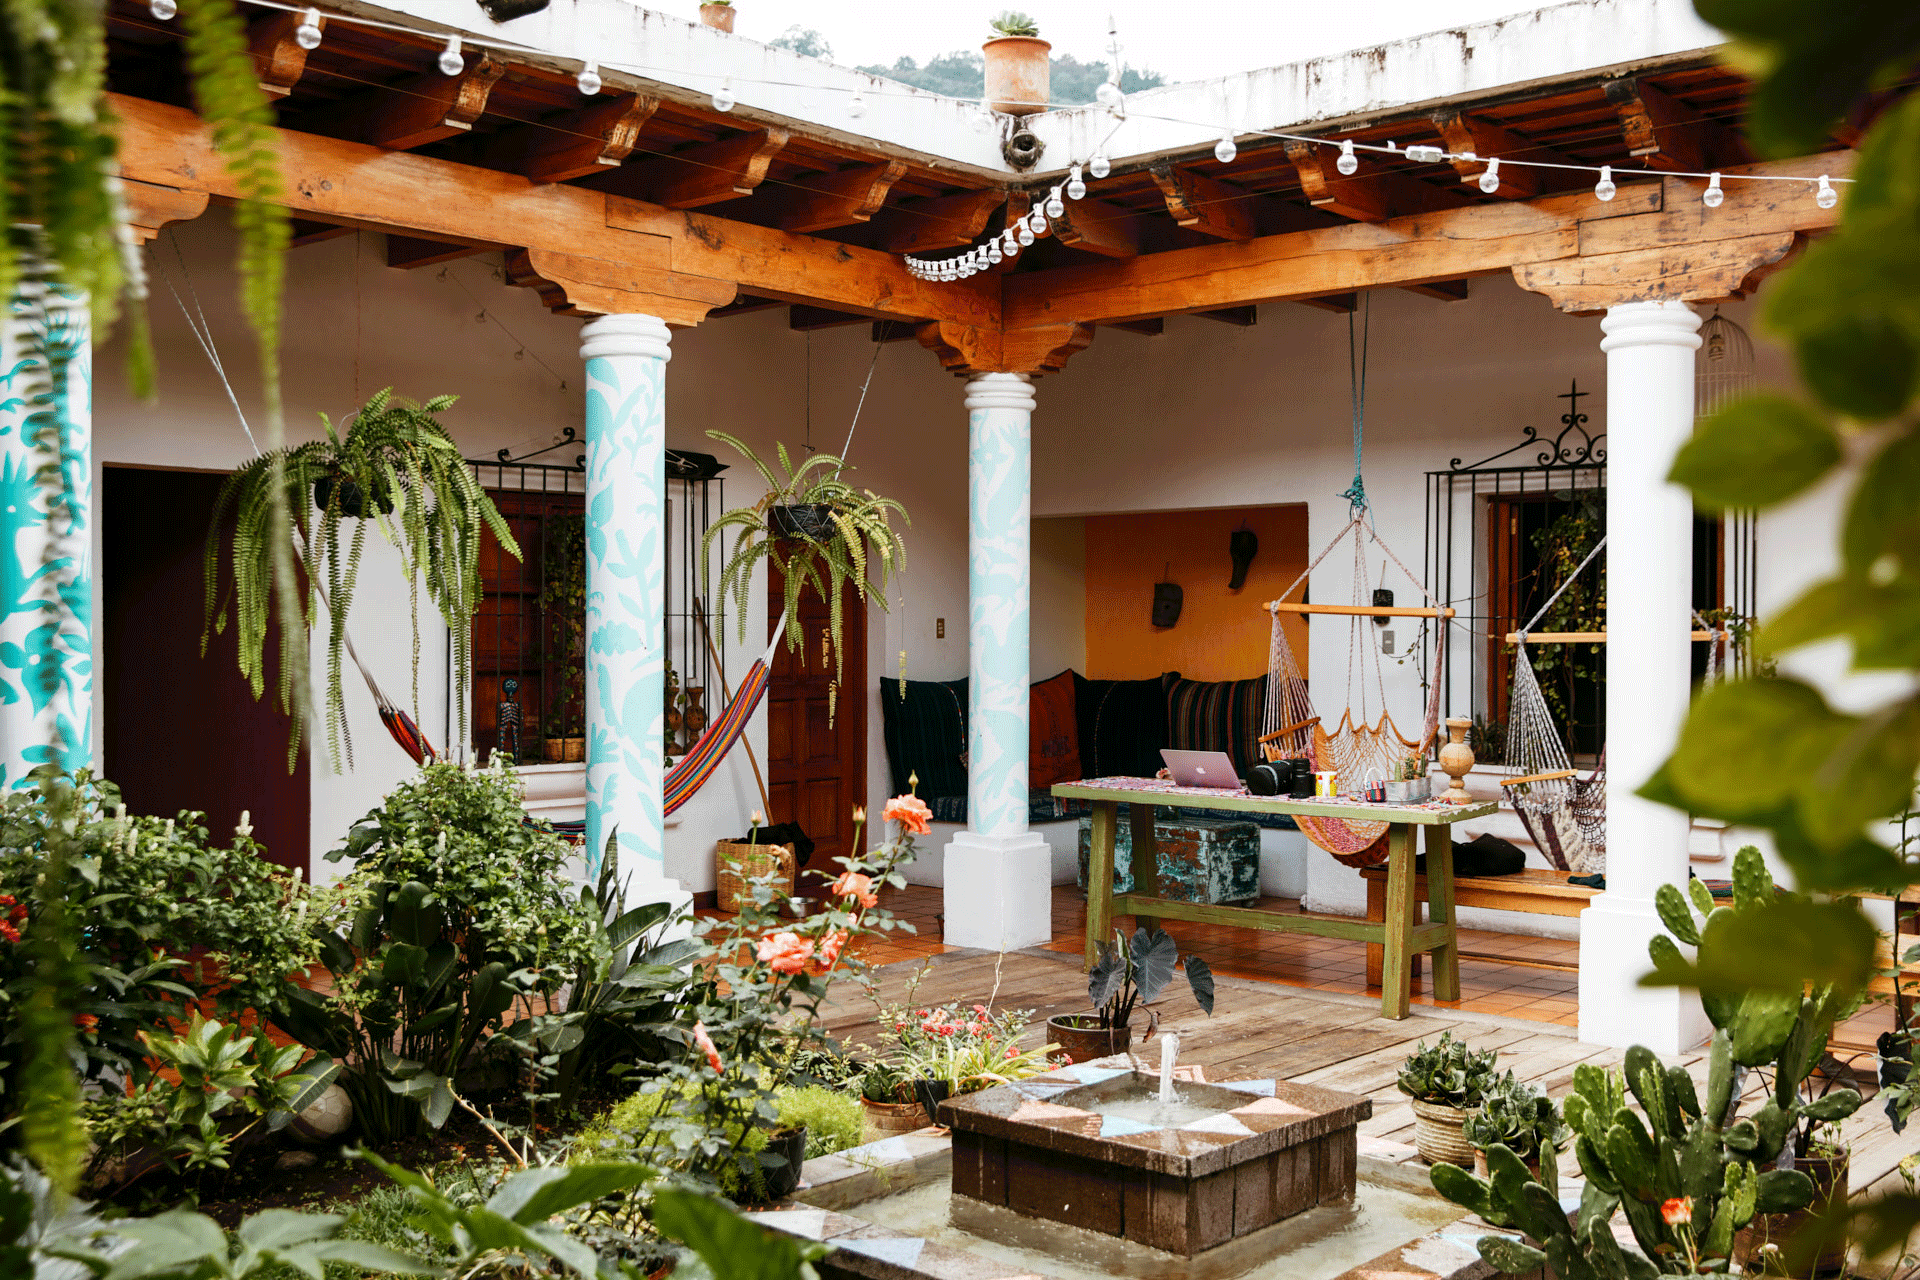 An open courtyard with a fountain, hammock chairs, and twinkle lights strung overhead.